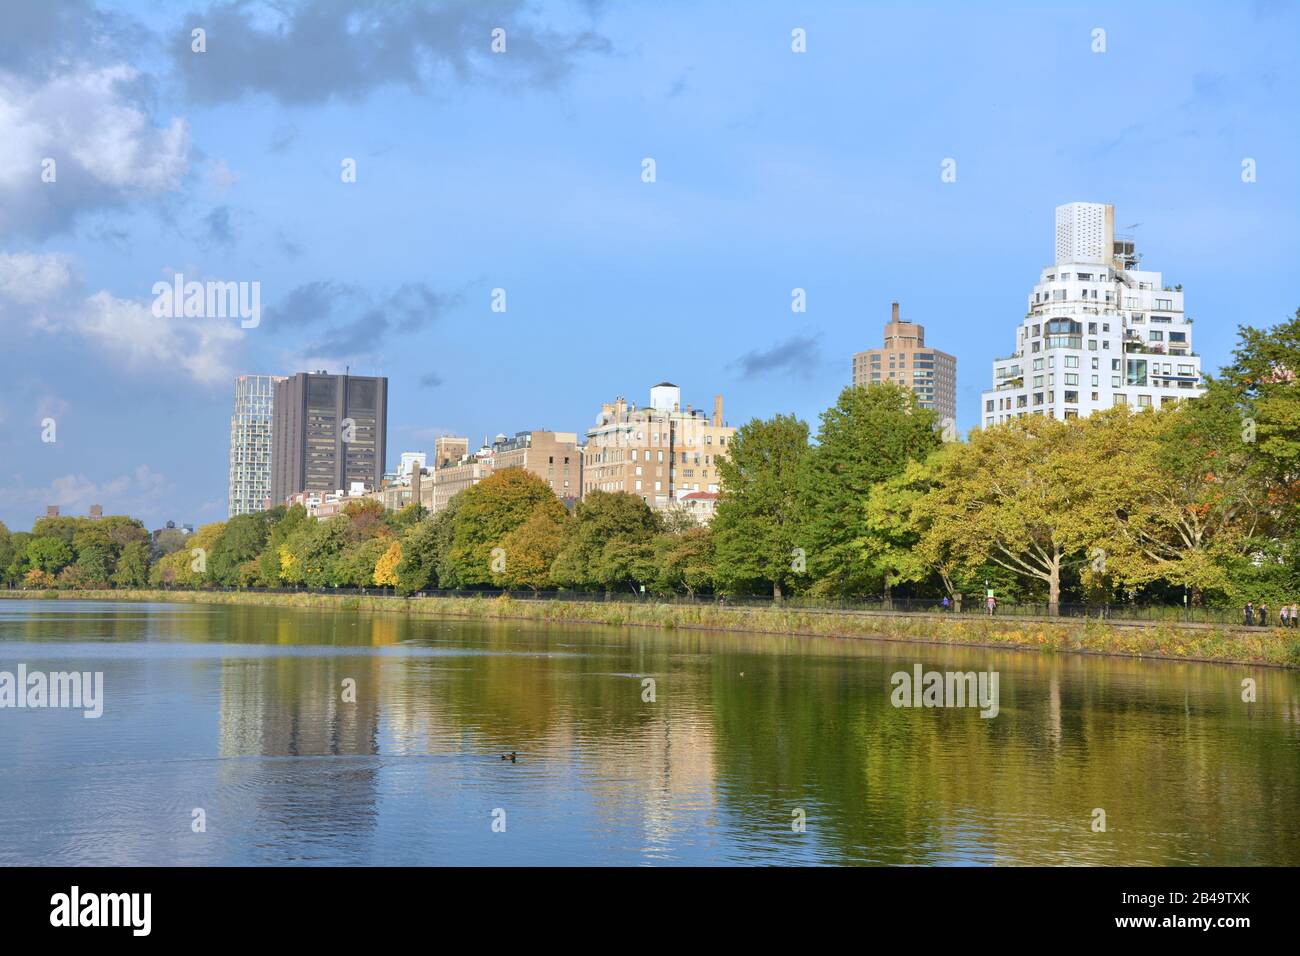 NEW YORK CITY, USA - OCTOBER 16, 2014: Pond in New York City Central Park. Stock Photo